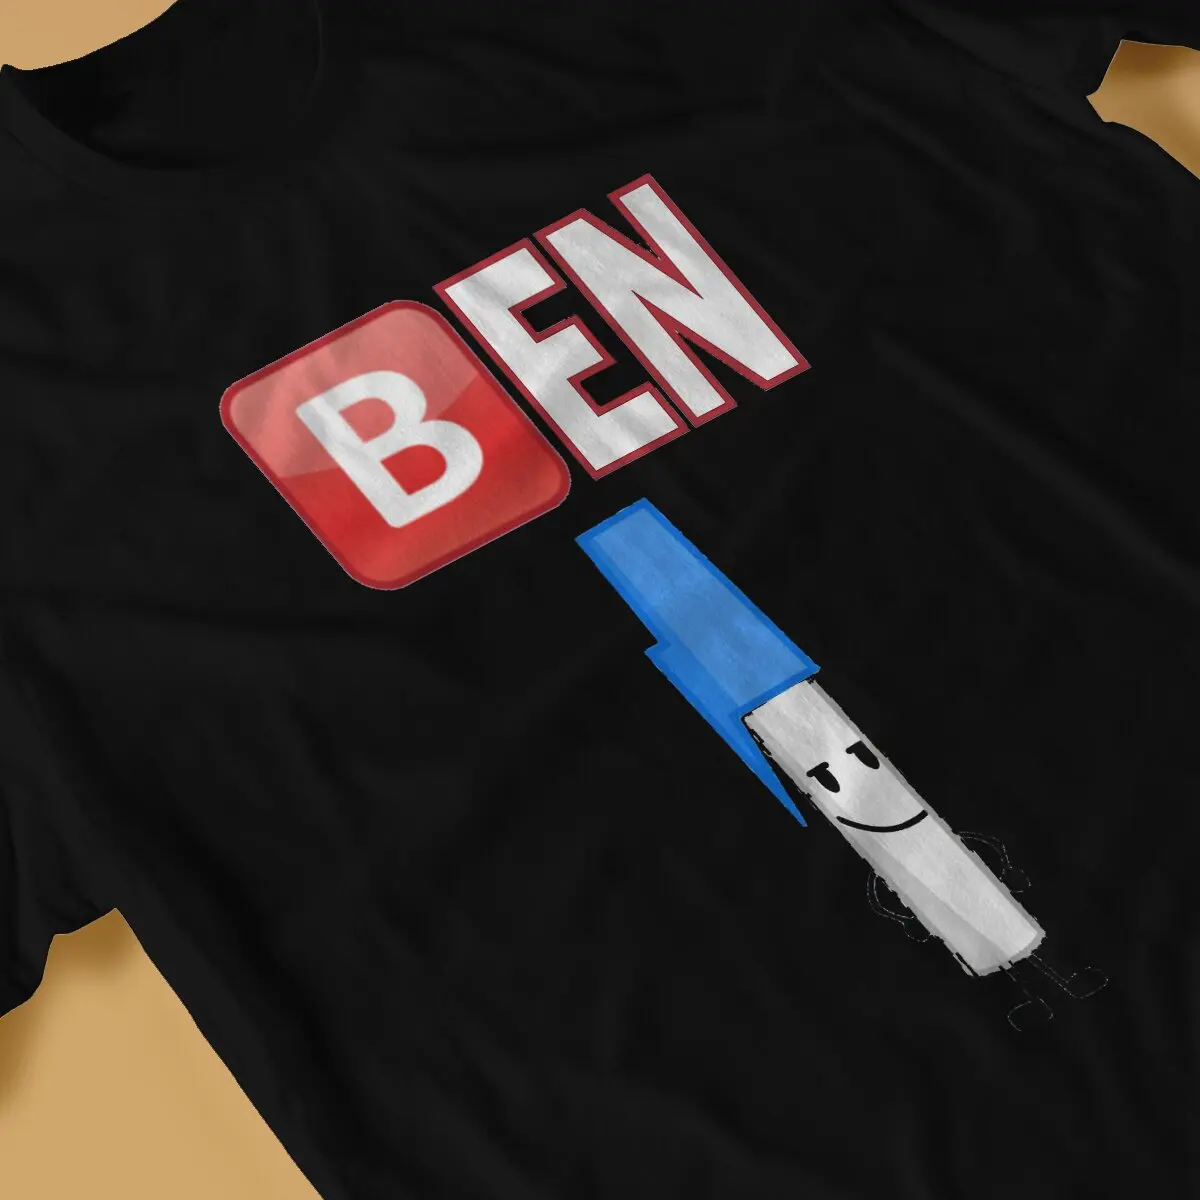 My Legal Name is Actually Ben Classic Women T Shirt Battle for Dream Island  BFDI and X Creative Tee Short Sleeve Round Neck - AliExpress